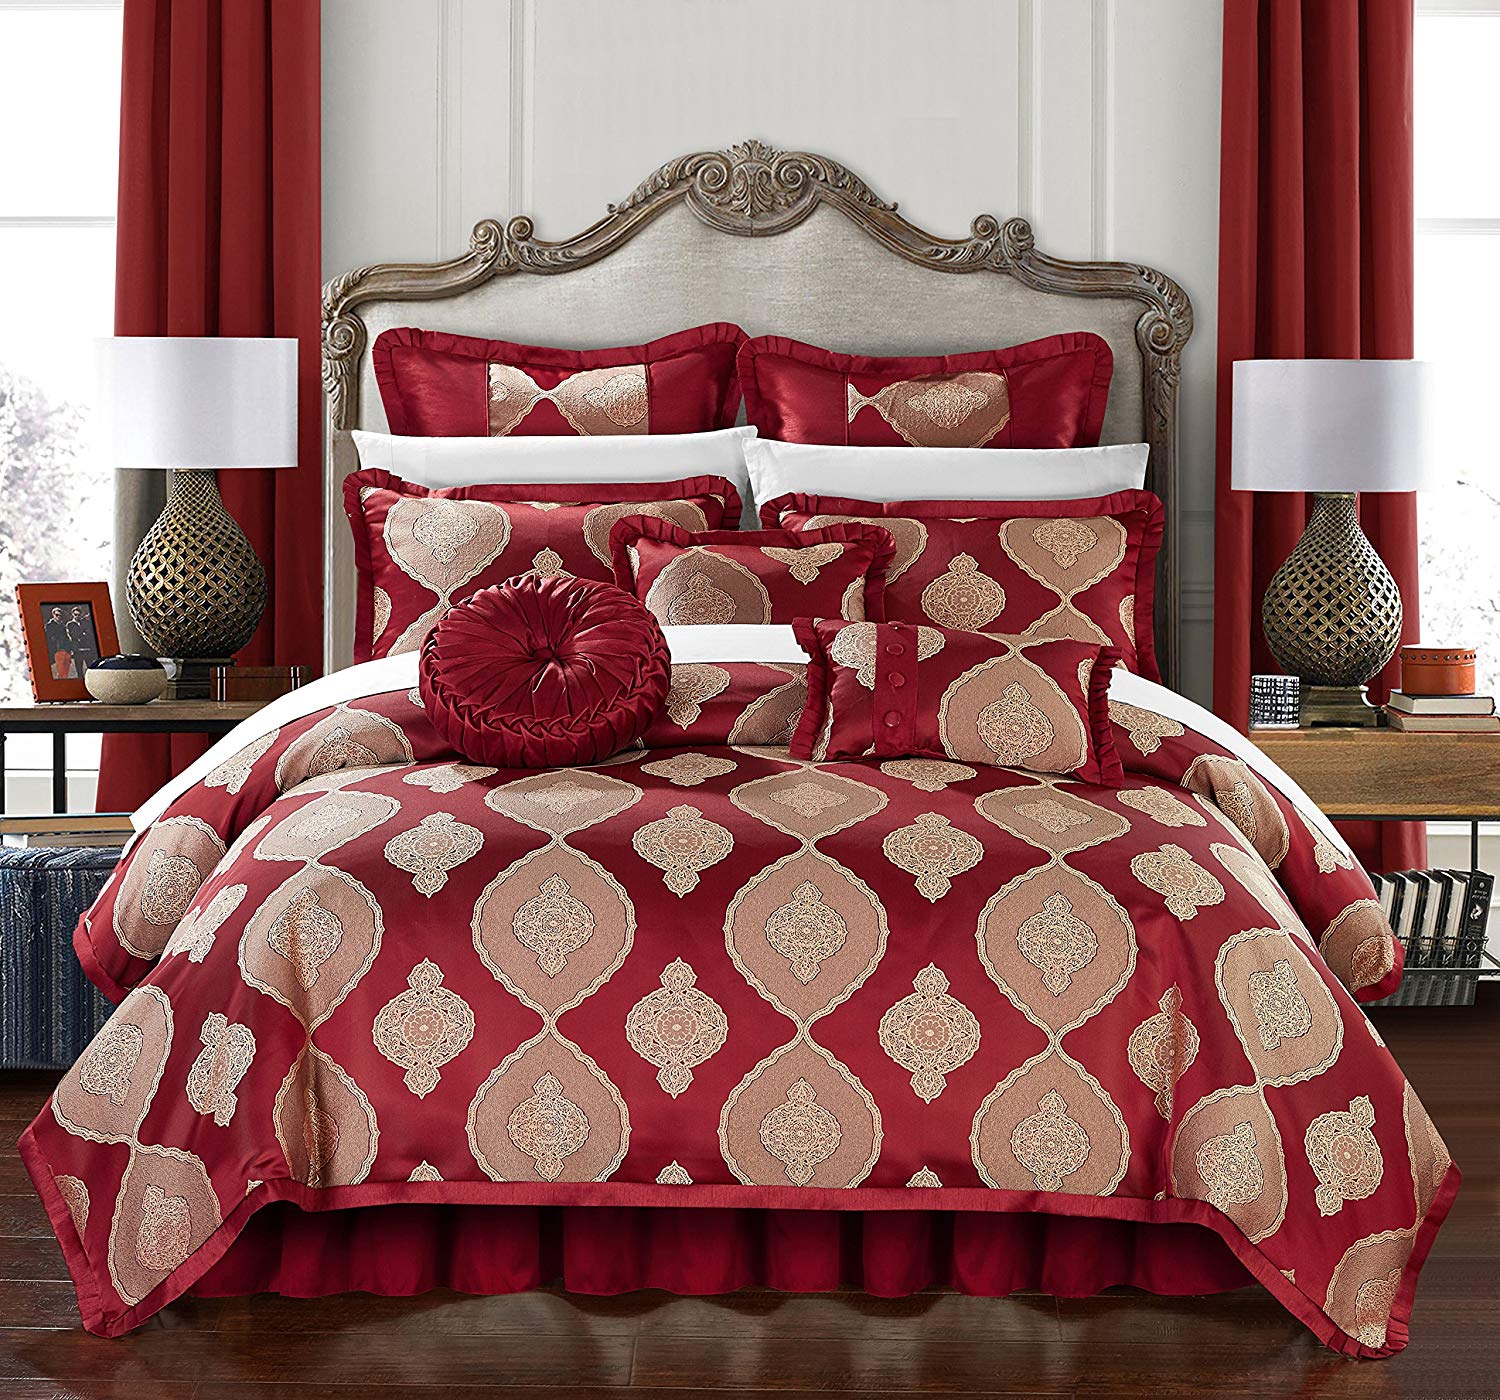 Chic Home Jamay 9 Piece Comforter Set Jacquard Scroll Faux Silk Bedding with Pleated Flange - Bed Skirt Decorative Pillows Shams Included, King Red